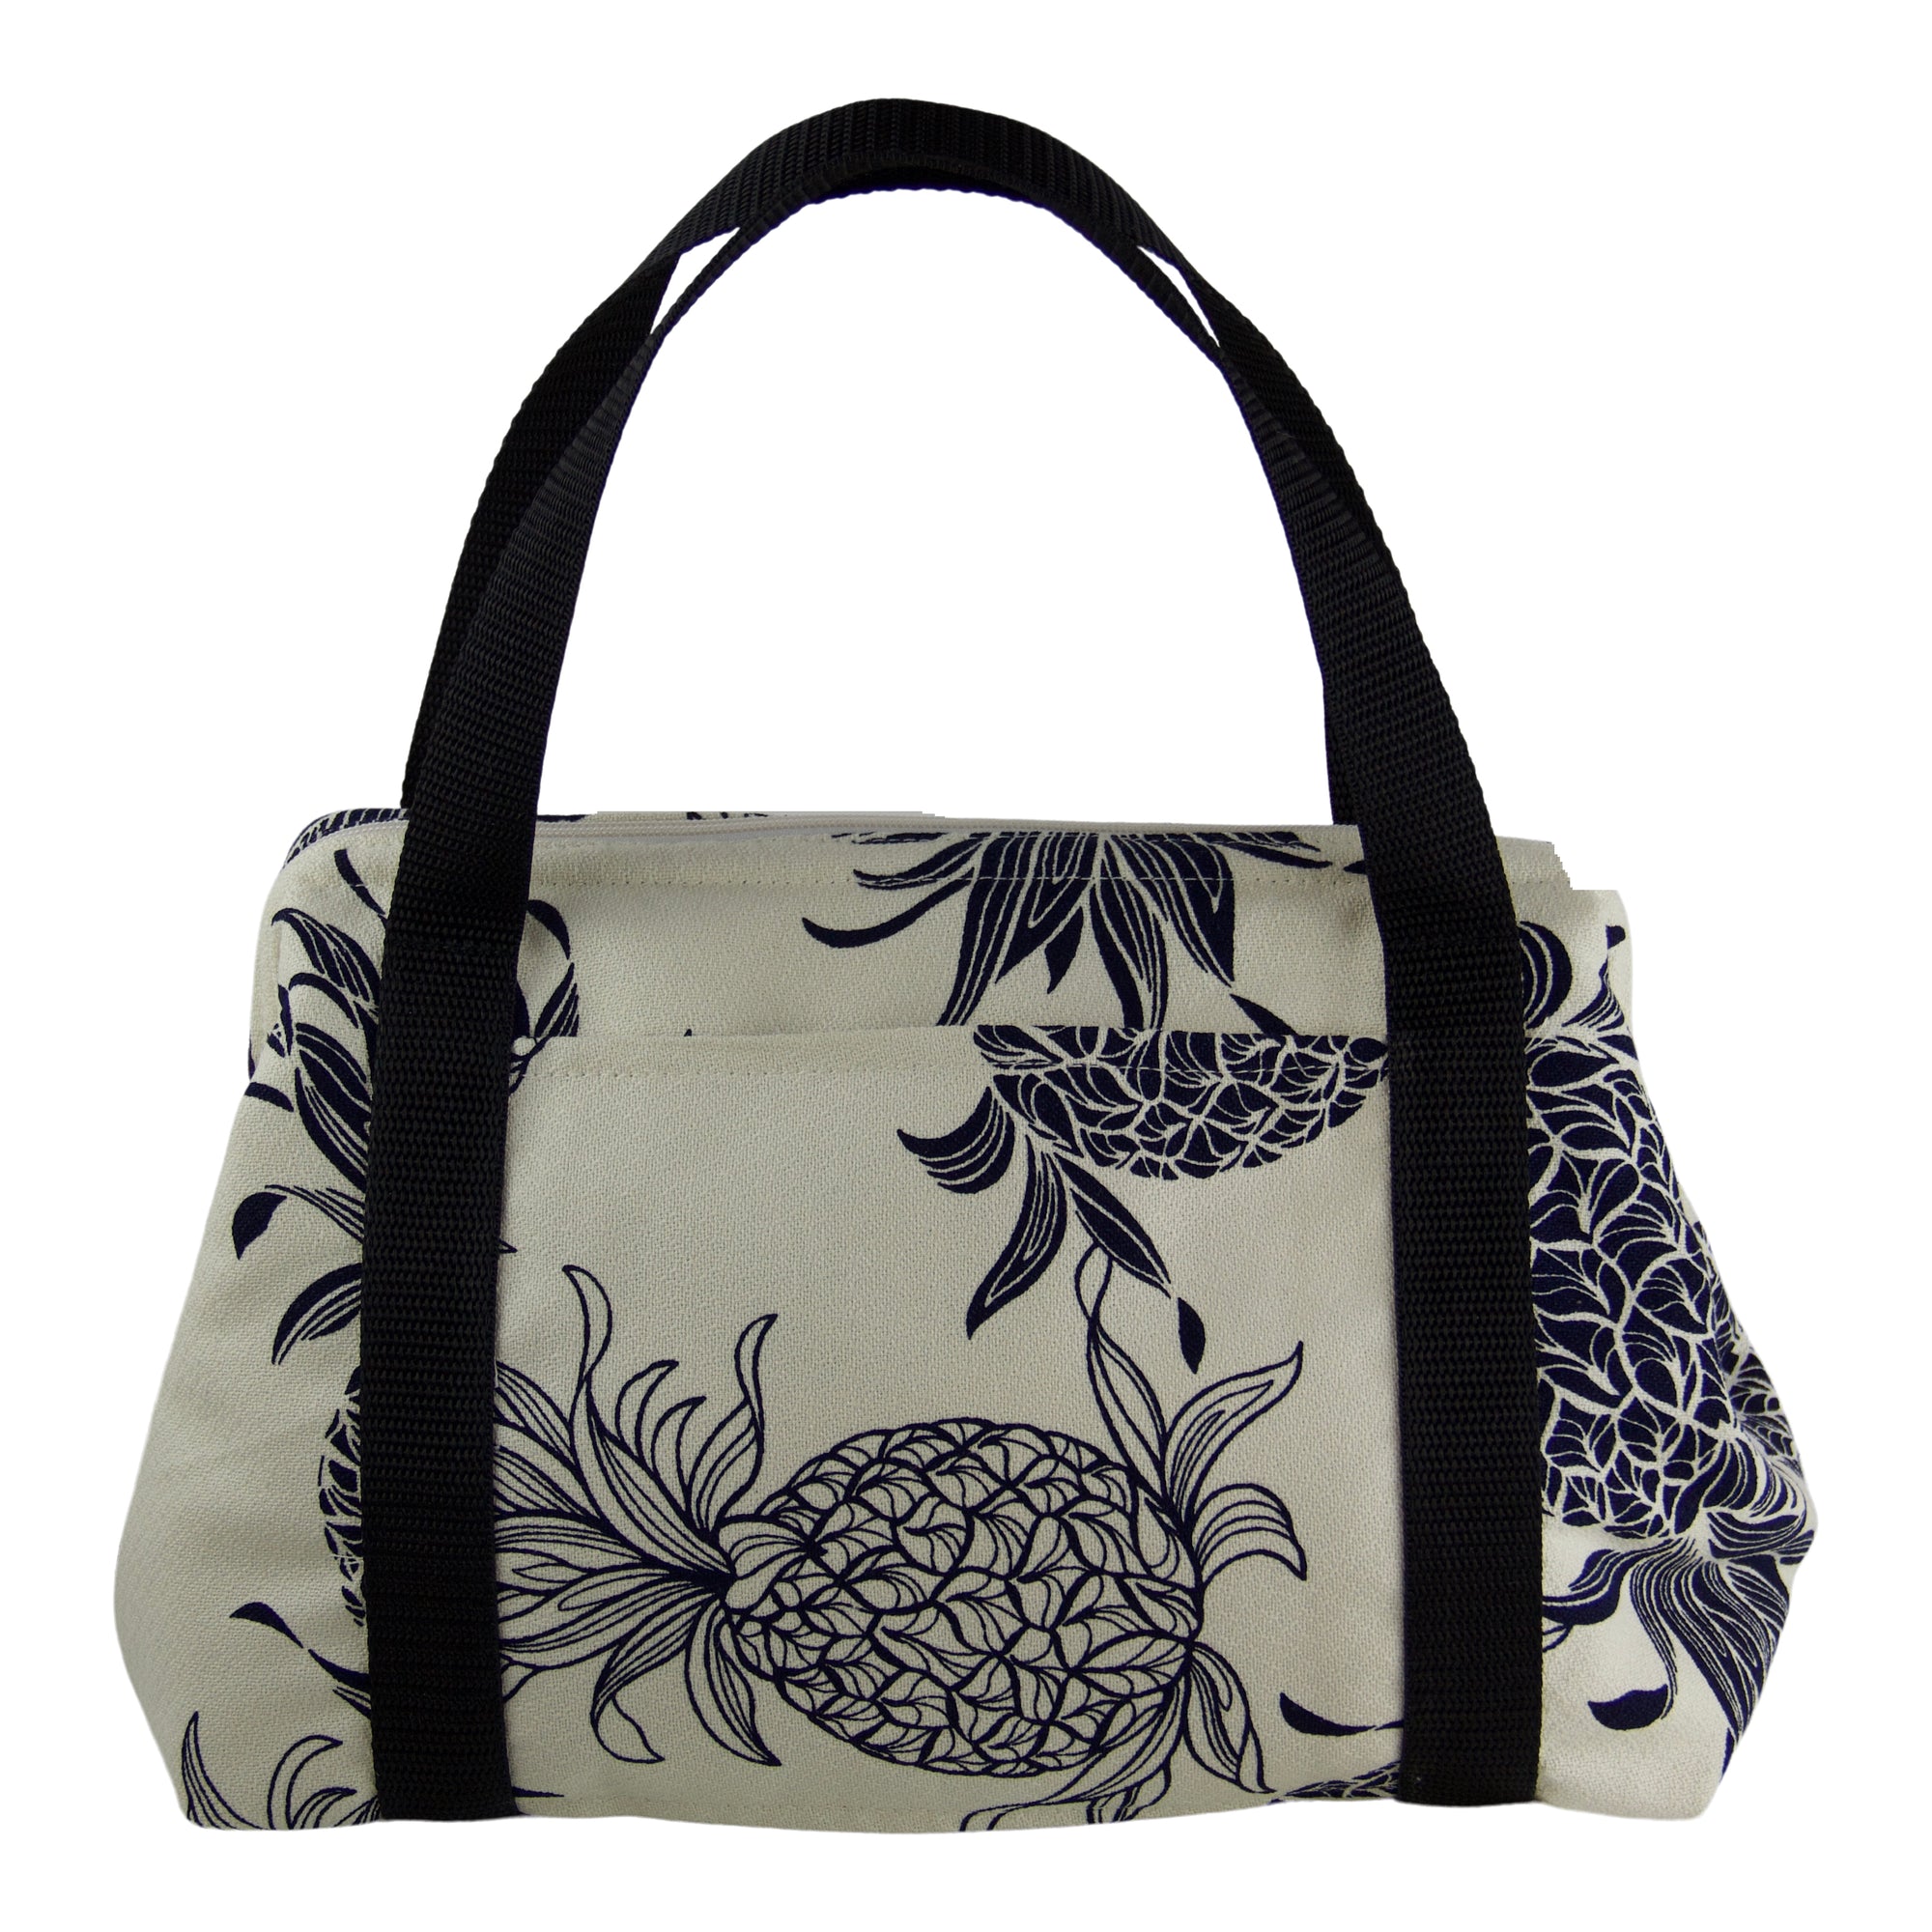 Large Insulated Toiletry/Lunch bag-Pineapple in Cotton Crepe